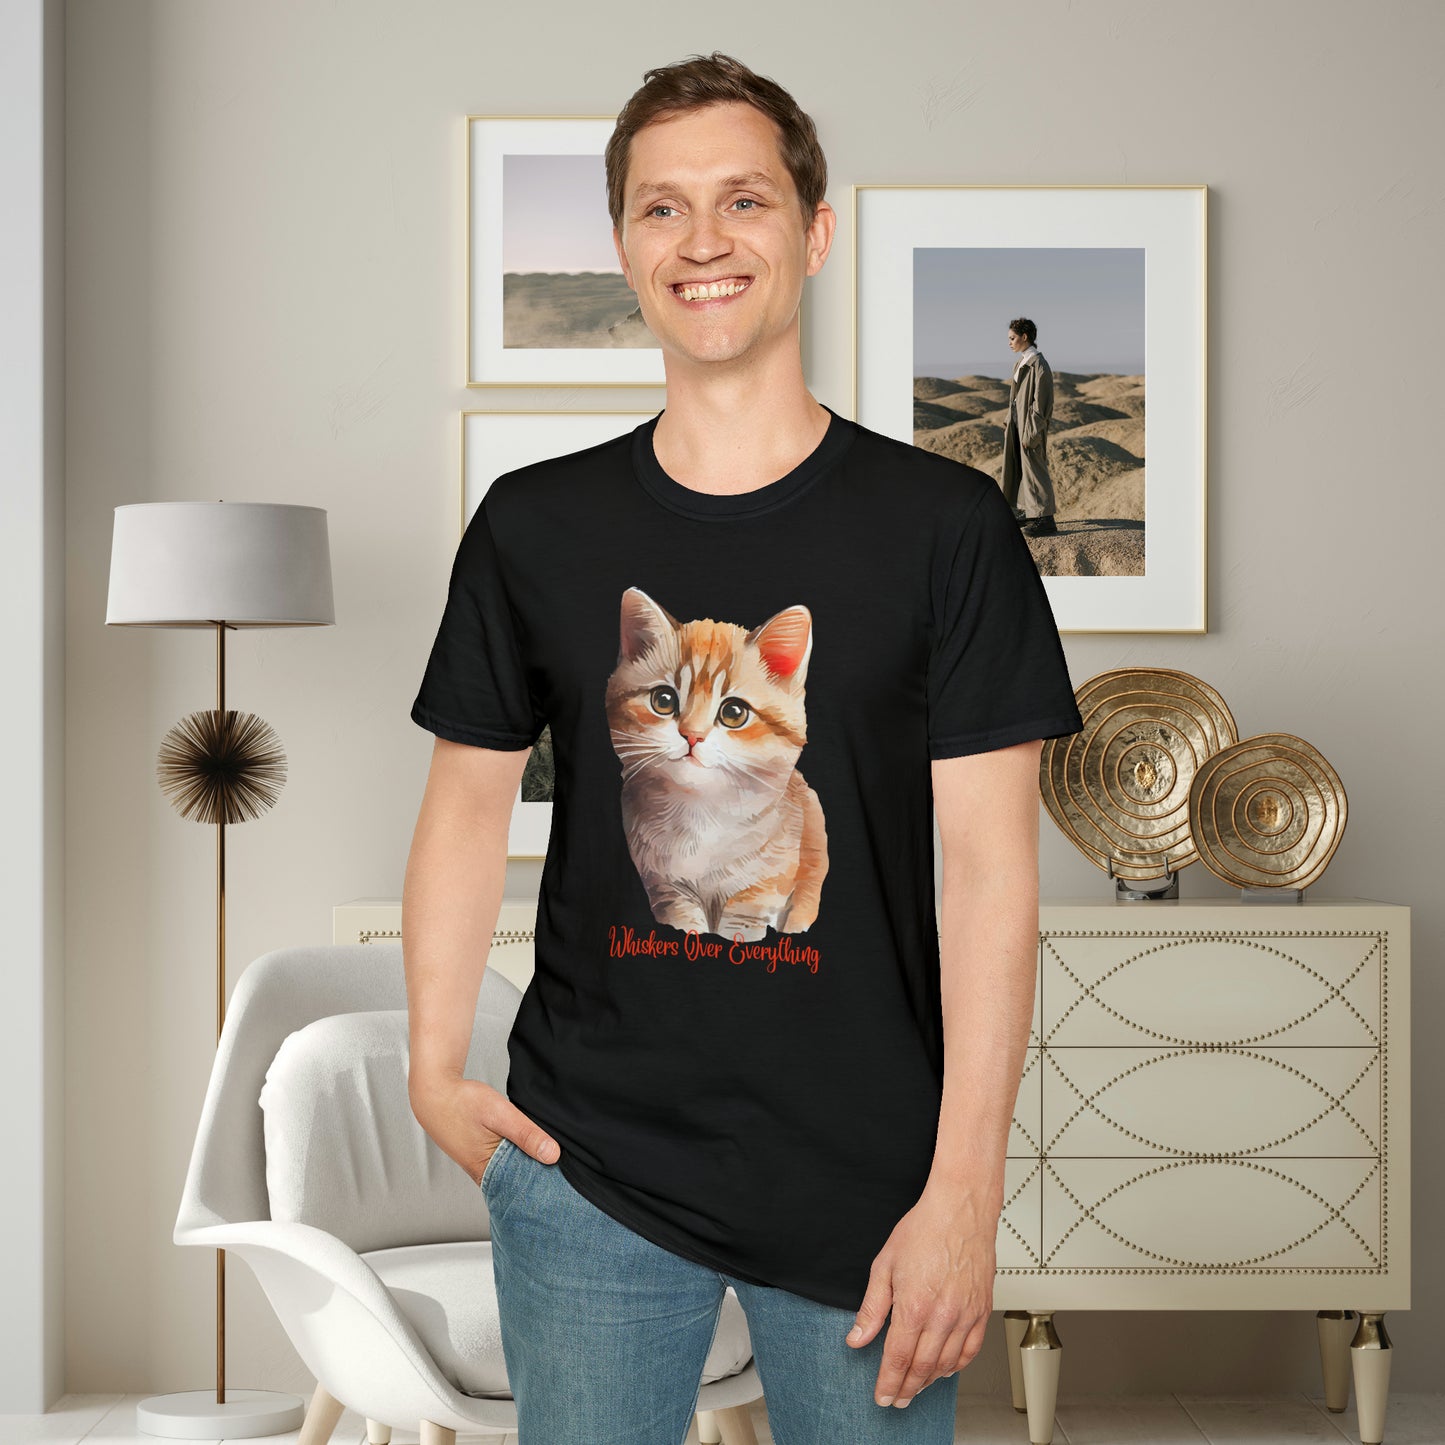 A cute cat with  “Whiskers over everything” below it on this Unisex Softstyle T-Shirt. Cat lovers get this.